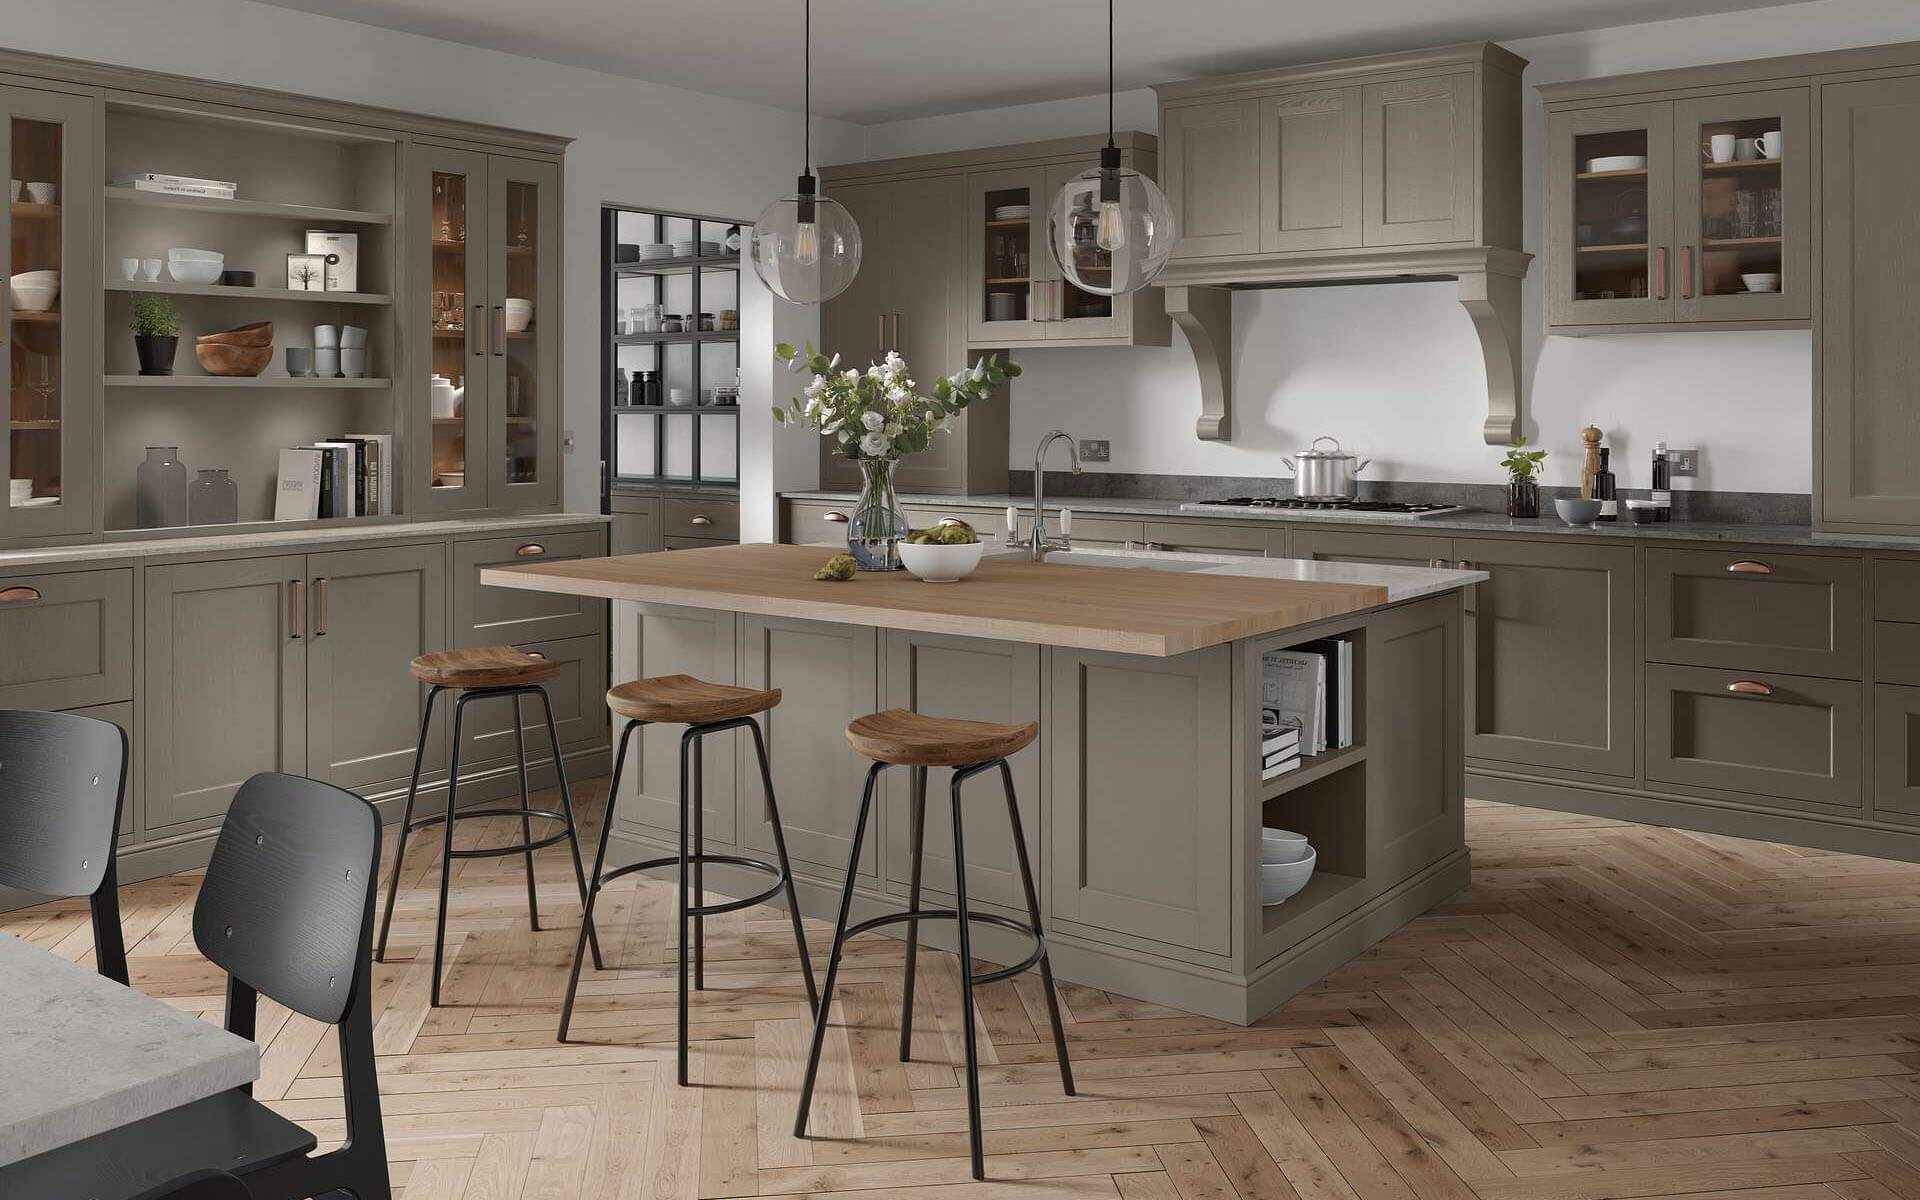 Portwood Stone Grey traditional kitchen with Breakfast Bar and Seating